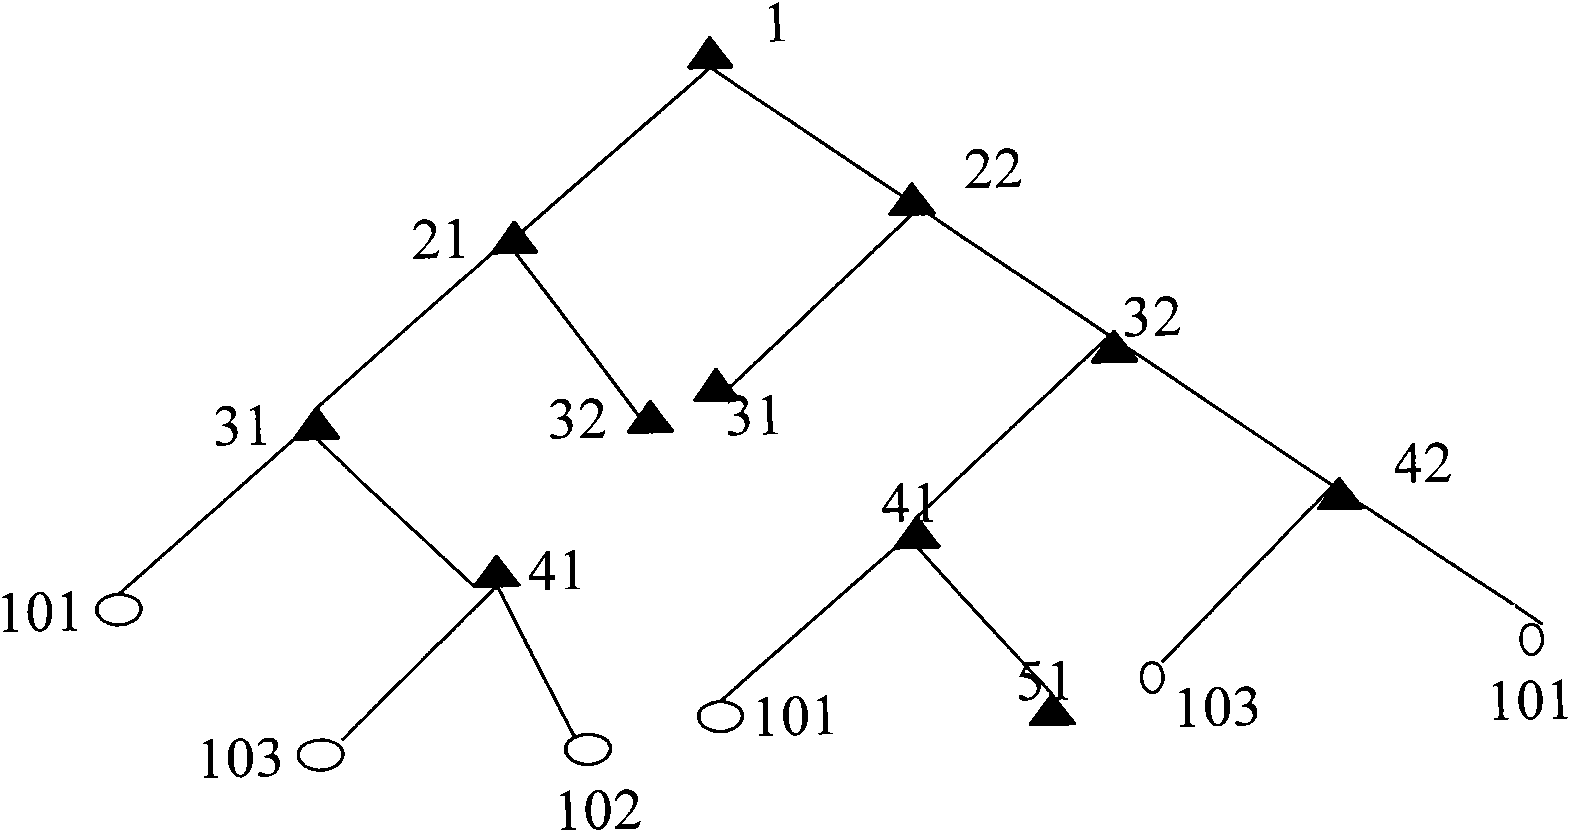 Multilevel joint coordination automatic voltage control method based on decision trees